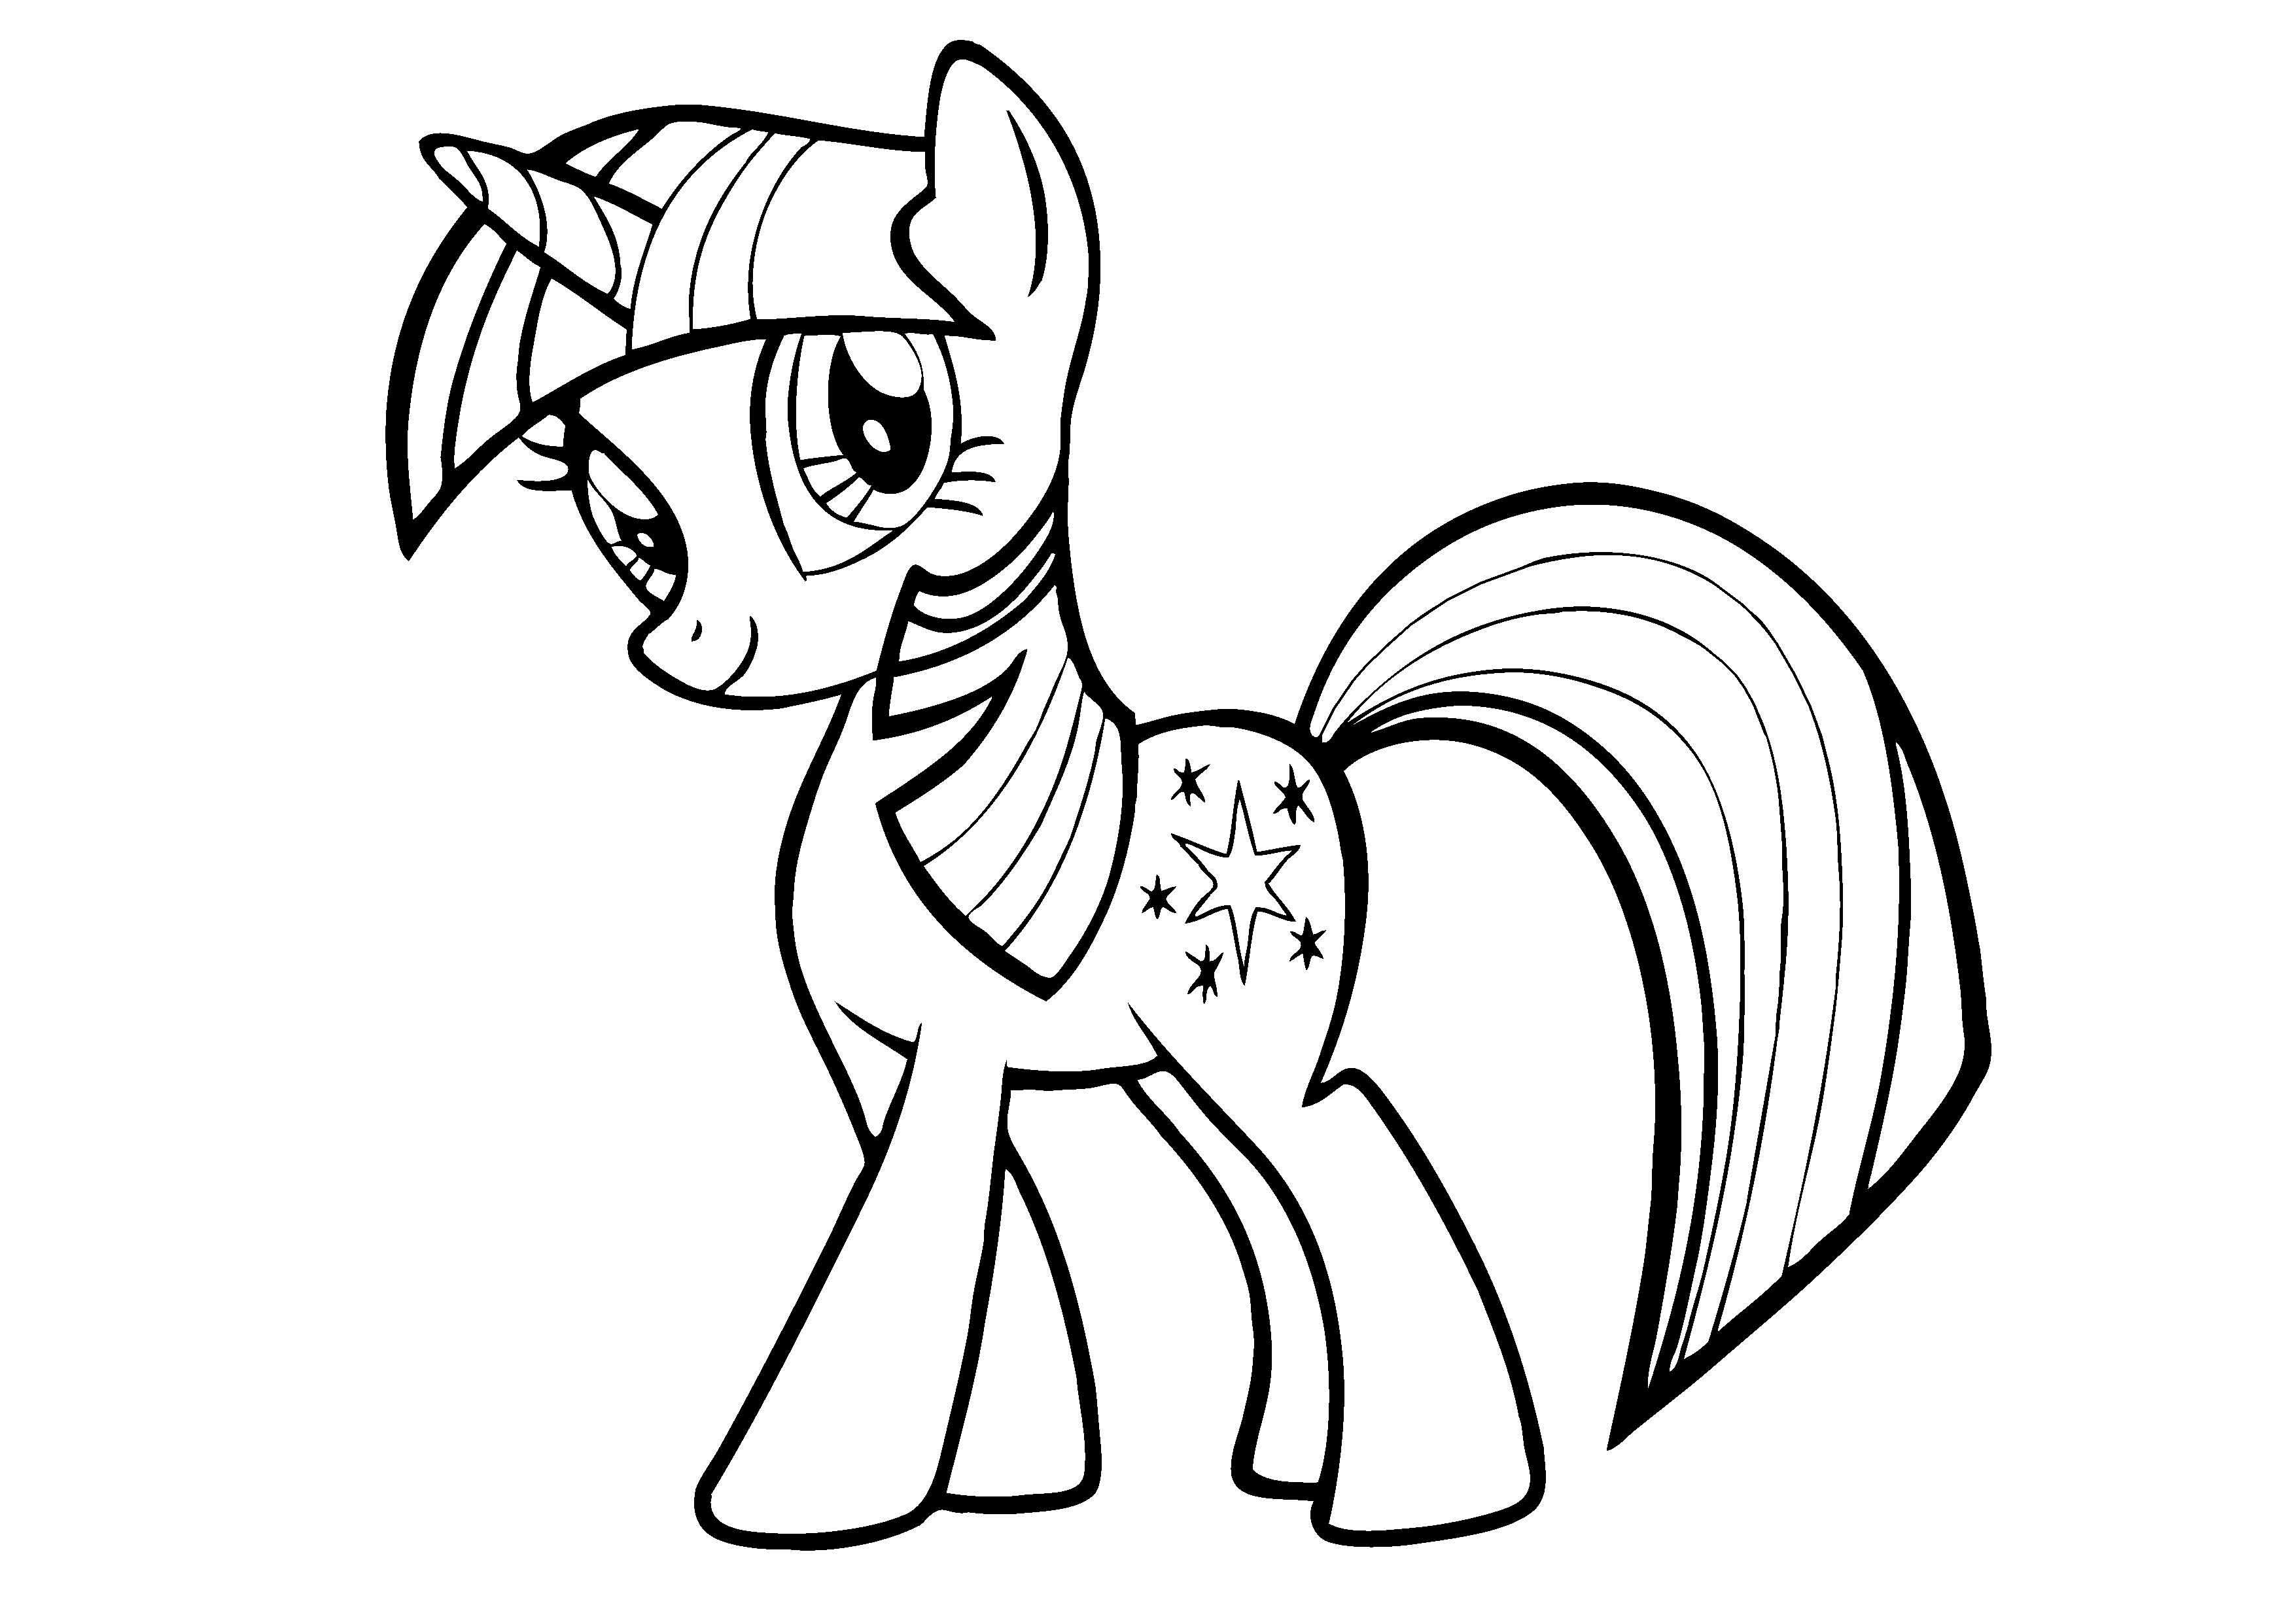 Free Printable My Little Pony Coloring Pages For Kids | Character - Free Printable Coloring Pages Of My Little Pony